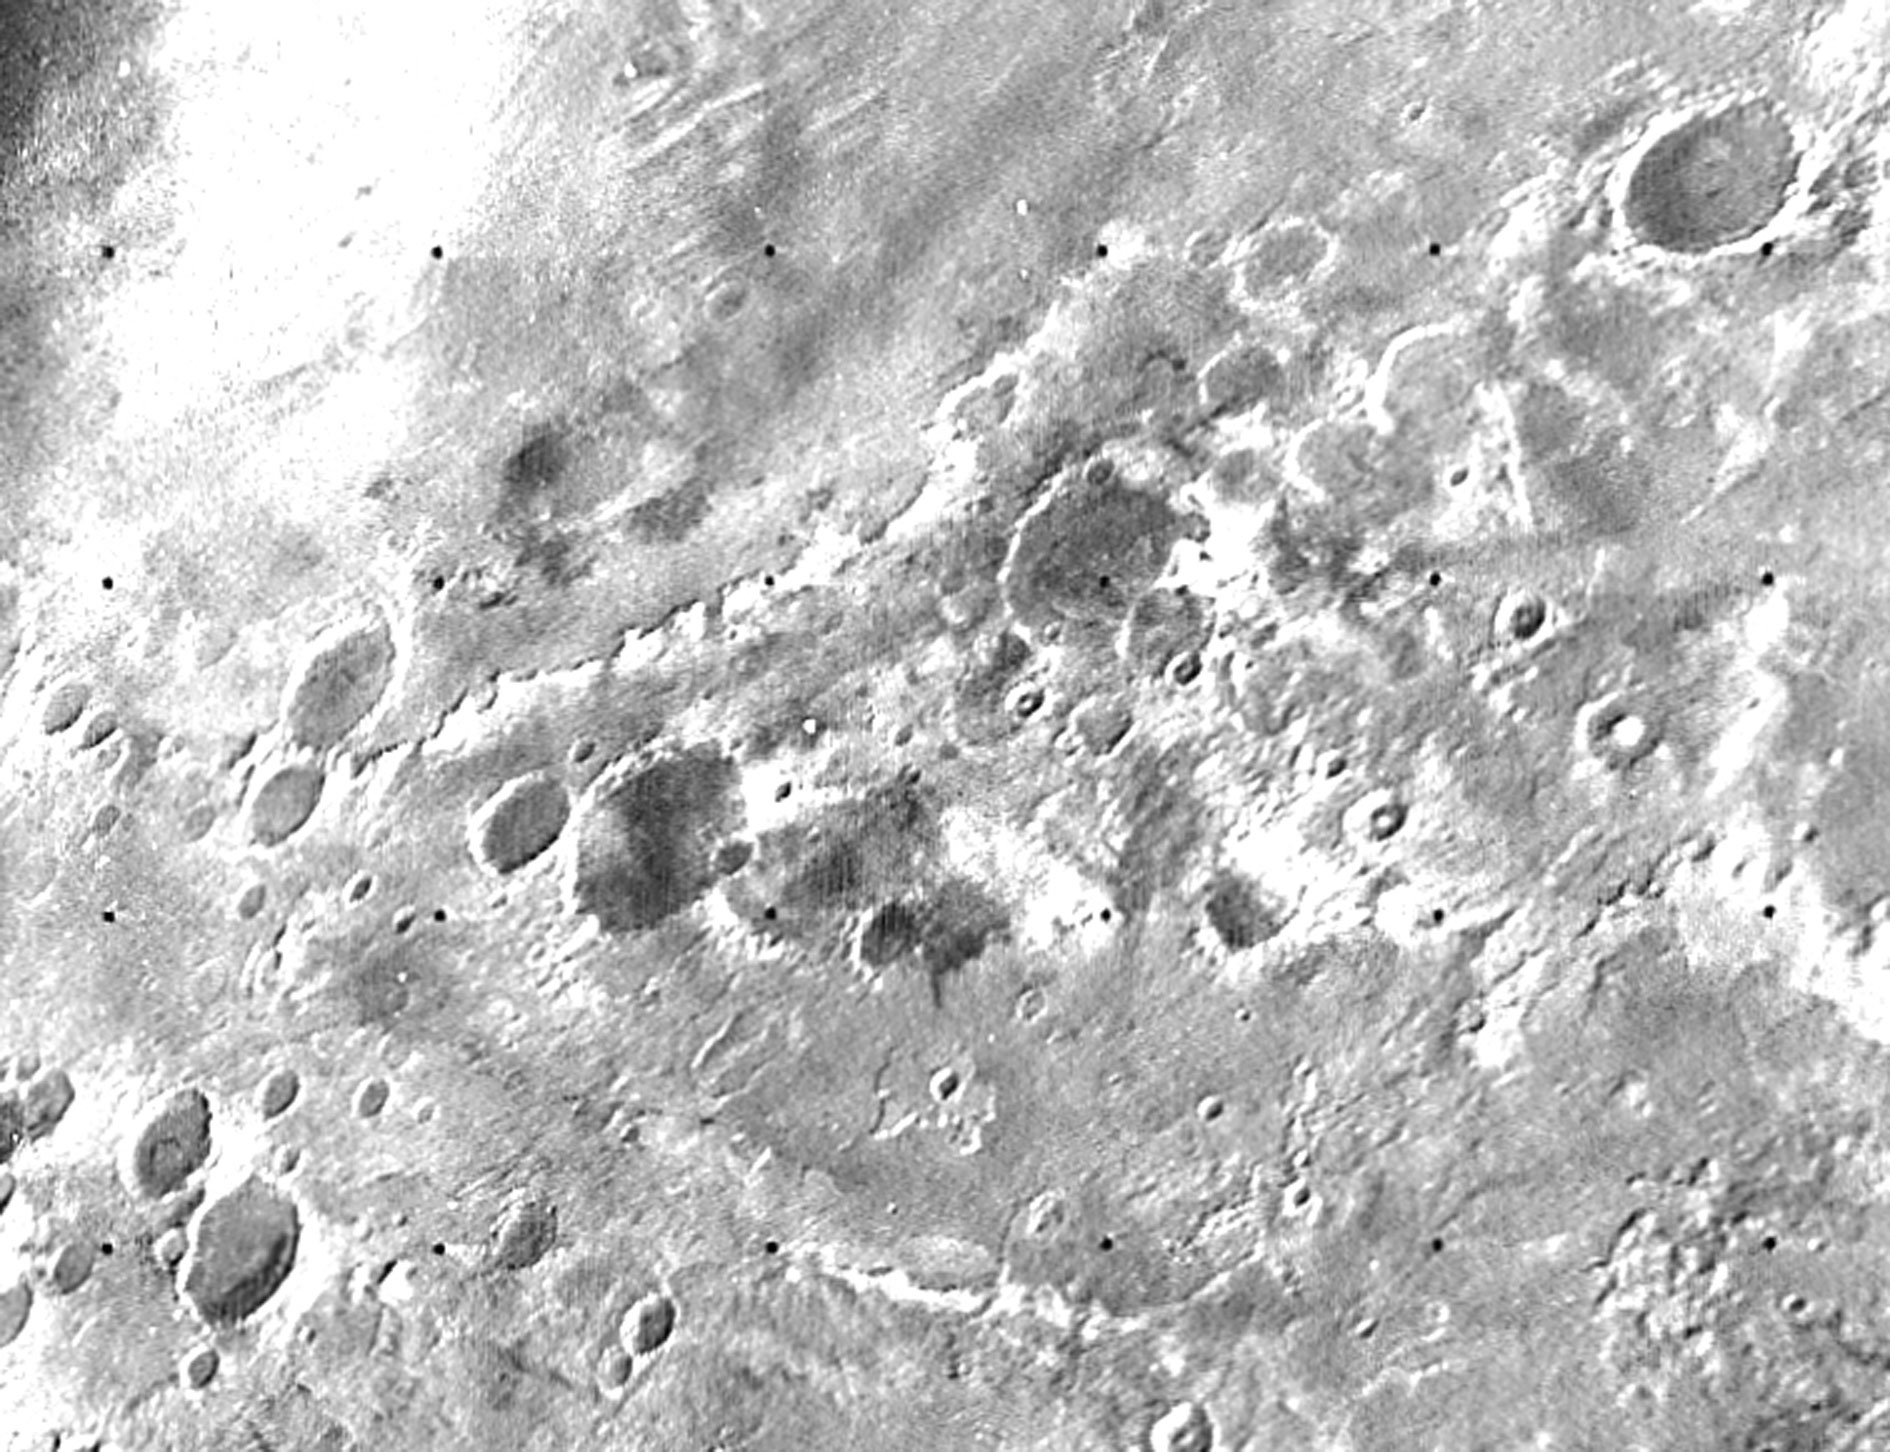 Mariner 7, following Mariner 6’s flyby on July 31, had its closest approach at a distance of 3,524 kilometers, in what was the first dual mission to a planet. By chance, both craft flew over cratered regions and missed both the giant northern volcanoes and the equatorial grand canyon that were discovered by Mariner 9. Their approach pictures did, however, show that the dark surface features long seen from Earth were not canals, as once thought in the 1800s.